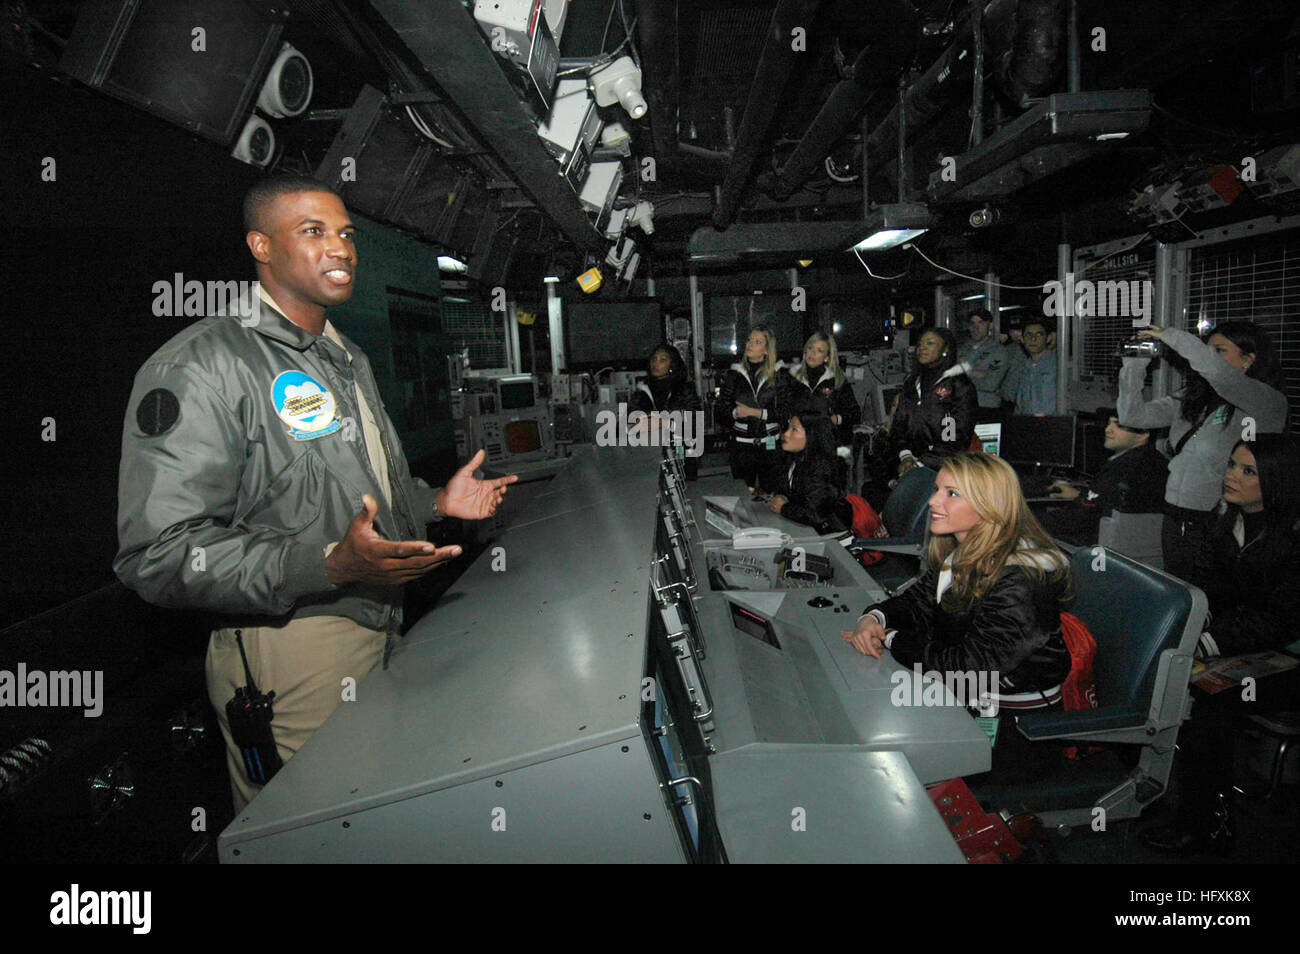 070209-N-7883G-011 Yokosuka, Japan (Feb. 9, 2007) - Lt. Arnold Roper, from Philadelphia, briefs the Tampa Bay Buccaneers Cheerleaders on the daily routine inside USS Kitty Hawk's (CV 63) Combat Direction Center (CDC). As part of the 2007 Military Appreciation Tour, the Tampa Bay Buccaneers Cheerleaders are touring various military installations throughout Asia. U.S. Navy photo by Mass Communication Specialist Seaman Kyle D. Gahlau (RELEASED) US Navy 070209-N-7883G-011 Lt. Arnold Roper, from Philadelphia, briefs the Tampa Bay Buccaneers Cheerleaders on the daily routine inside USS Kitty Hawk (C Stock Photo